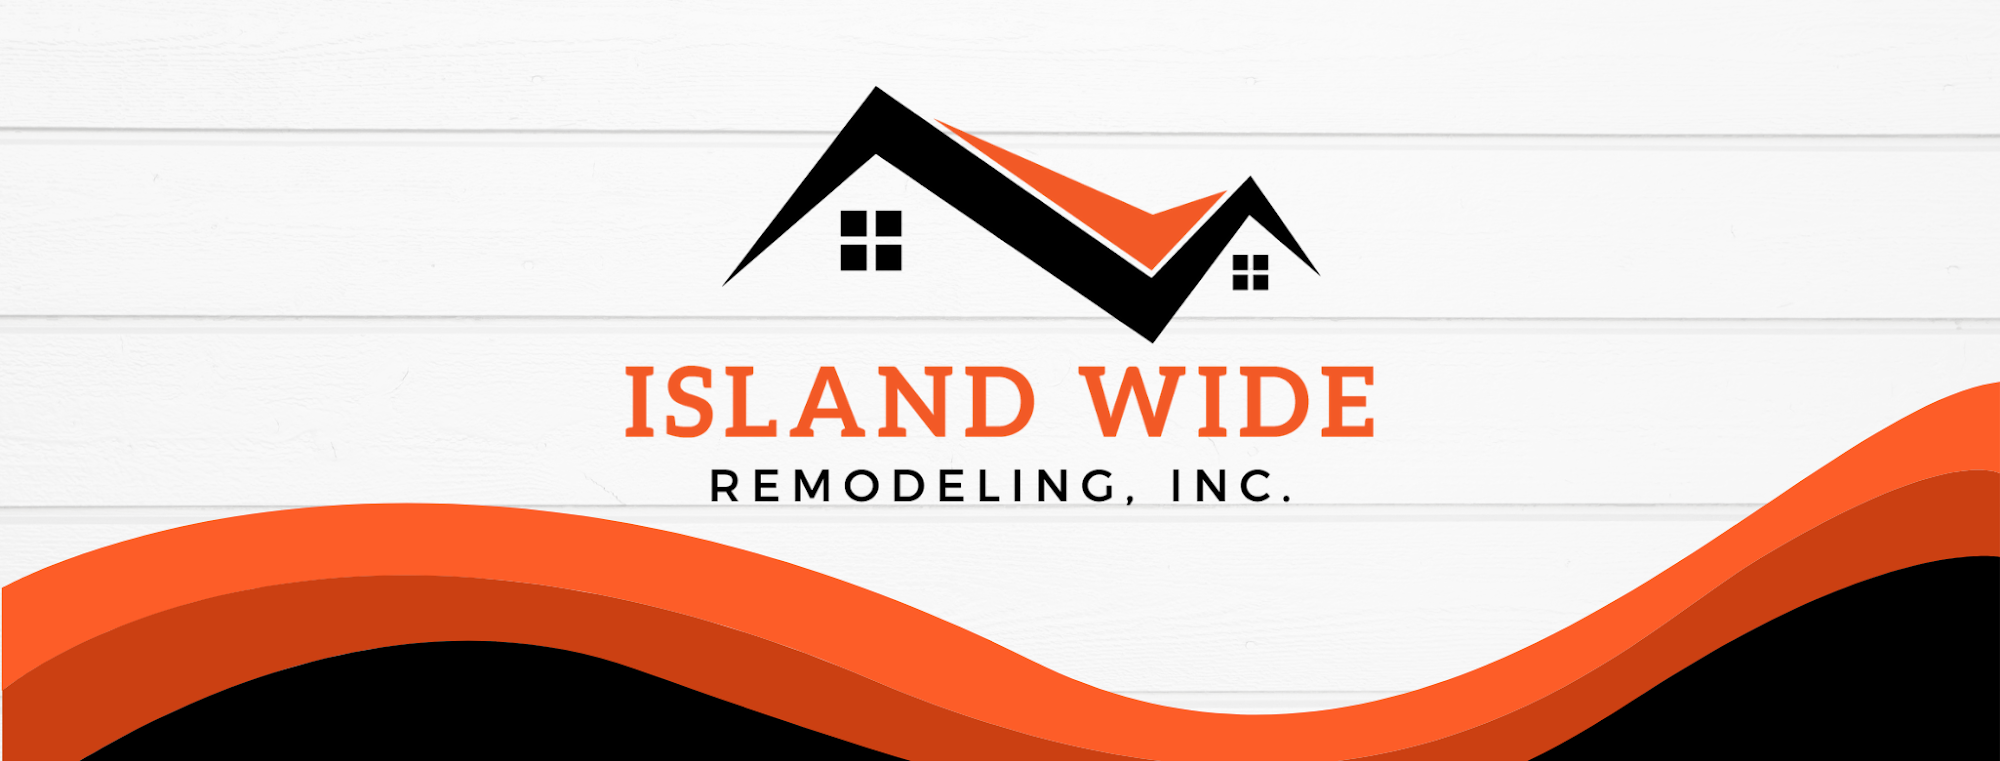 Island Wide Remodeling, Inc.